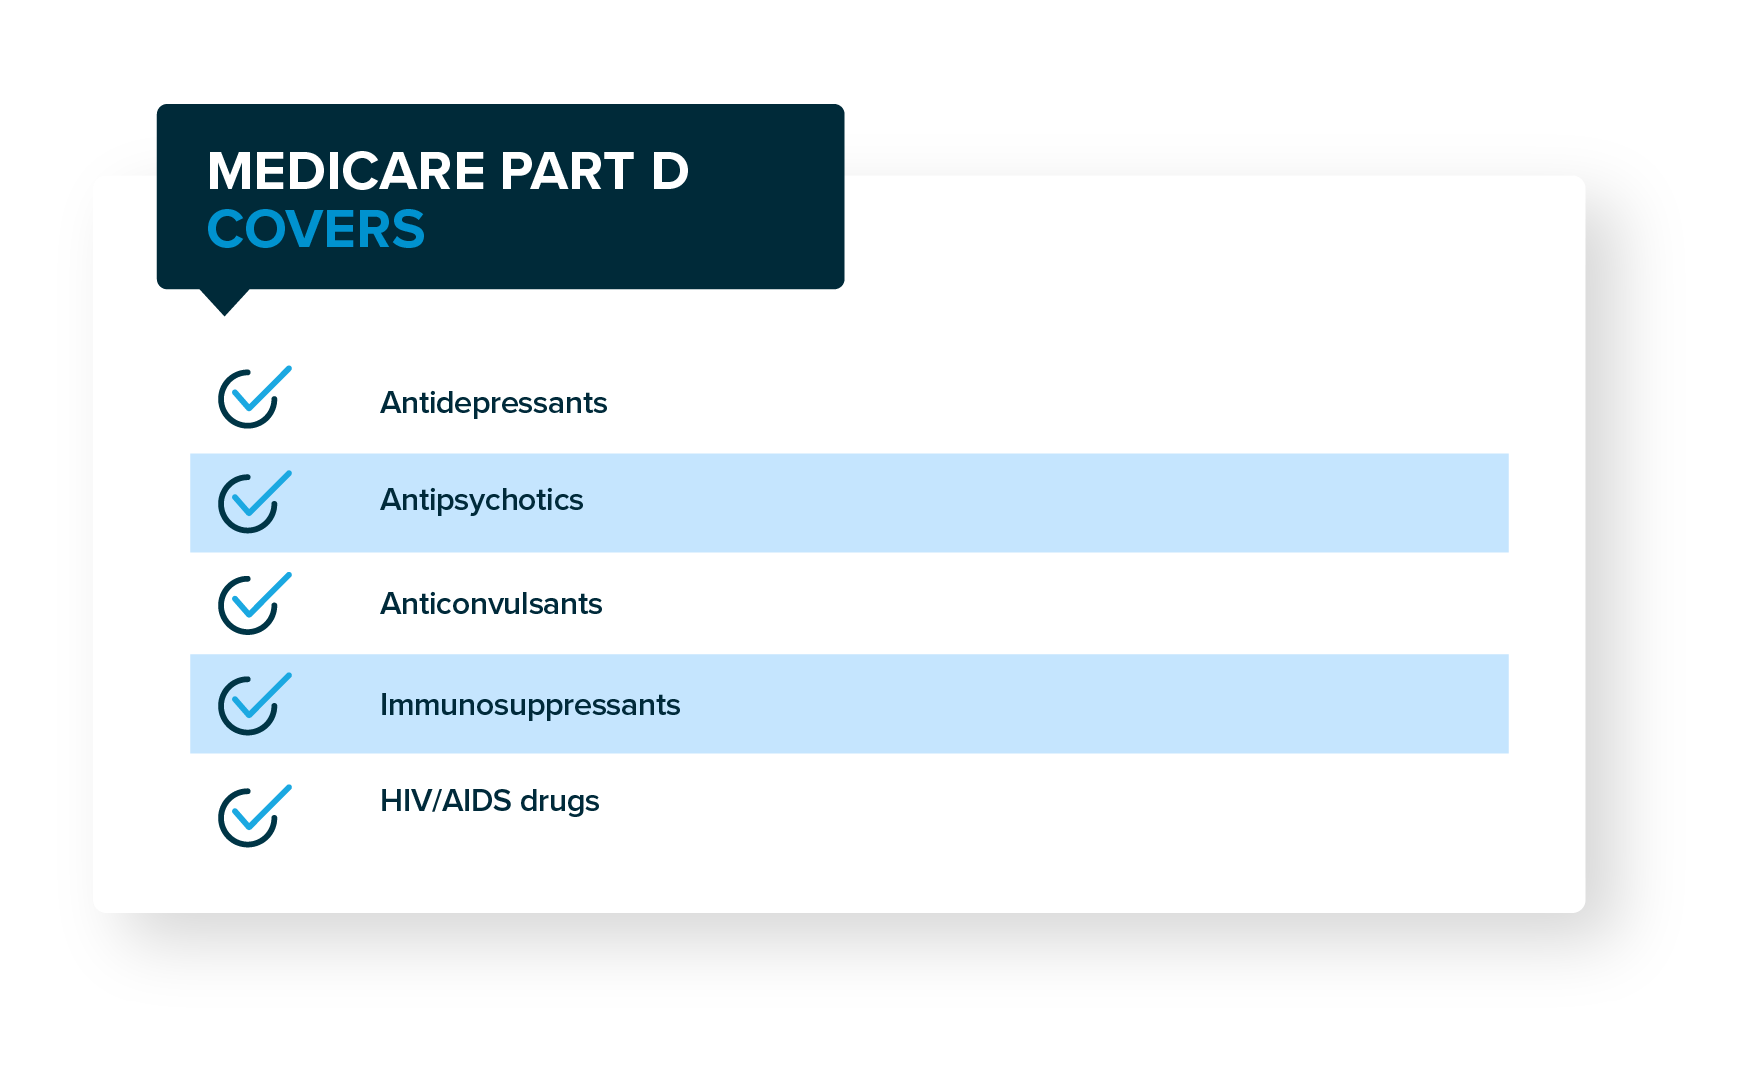 Medicare Part D covers these certain drugs.